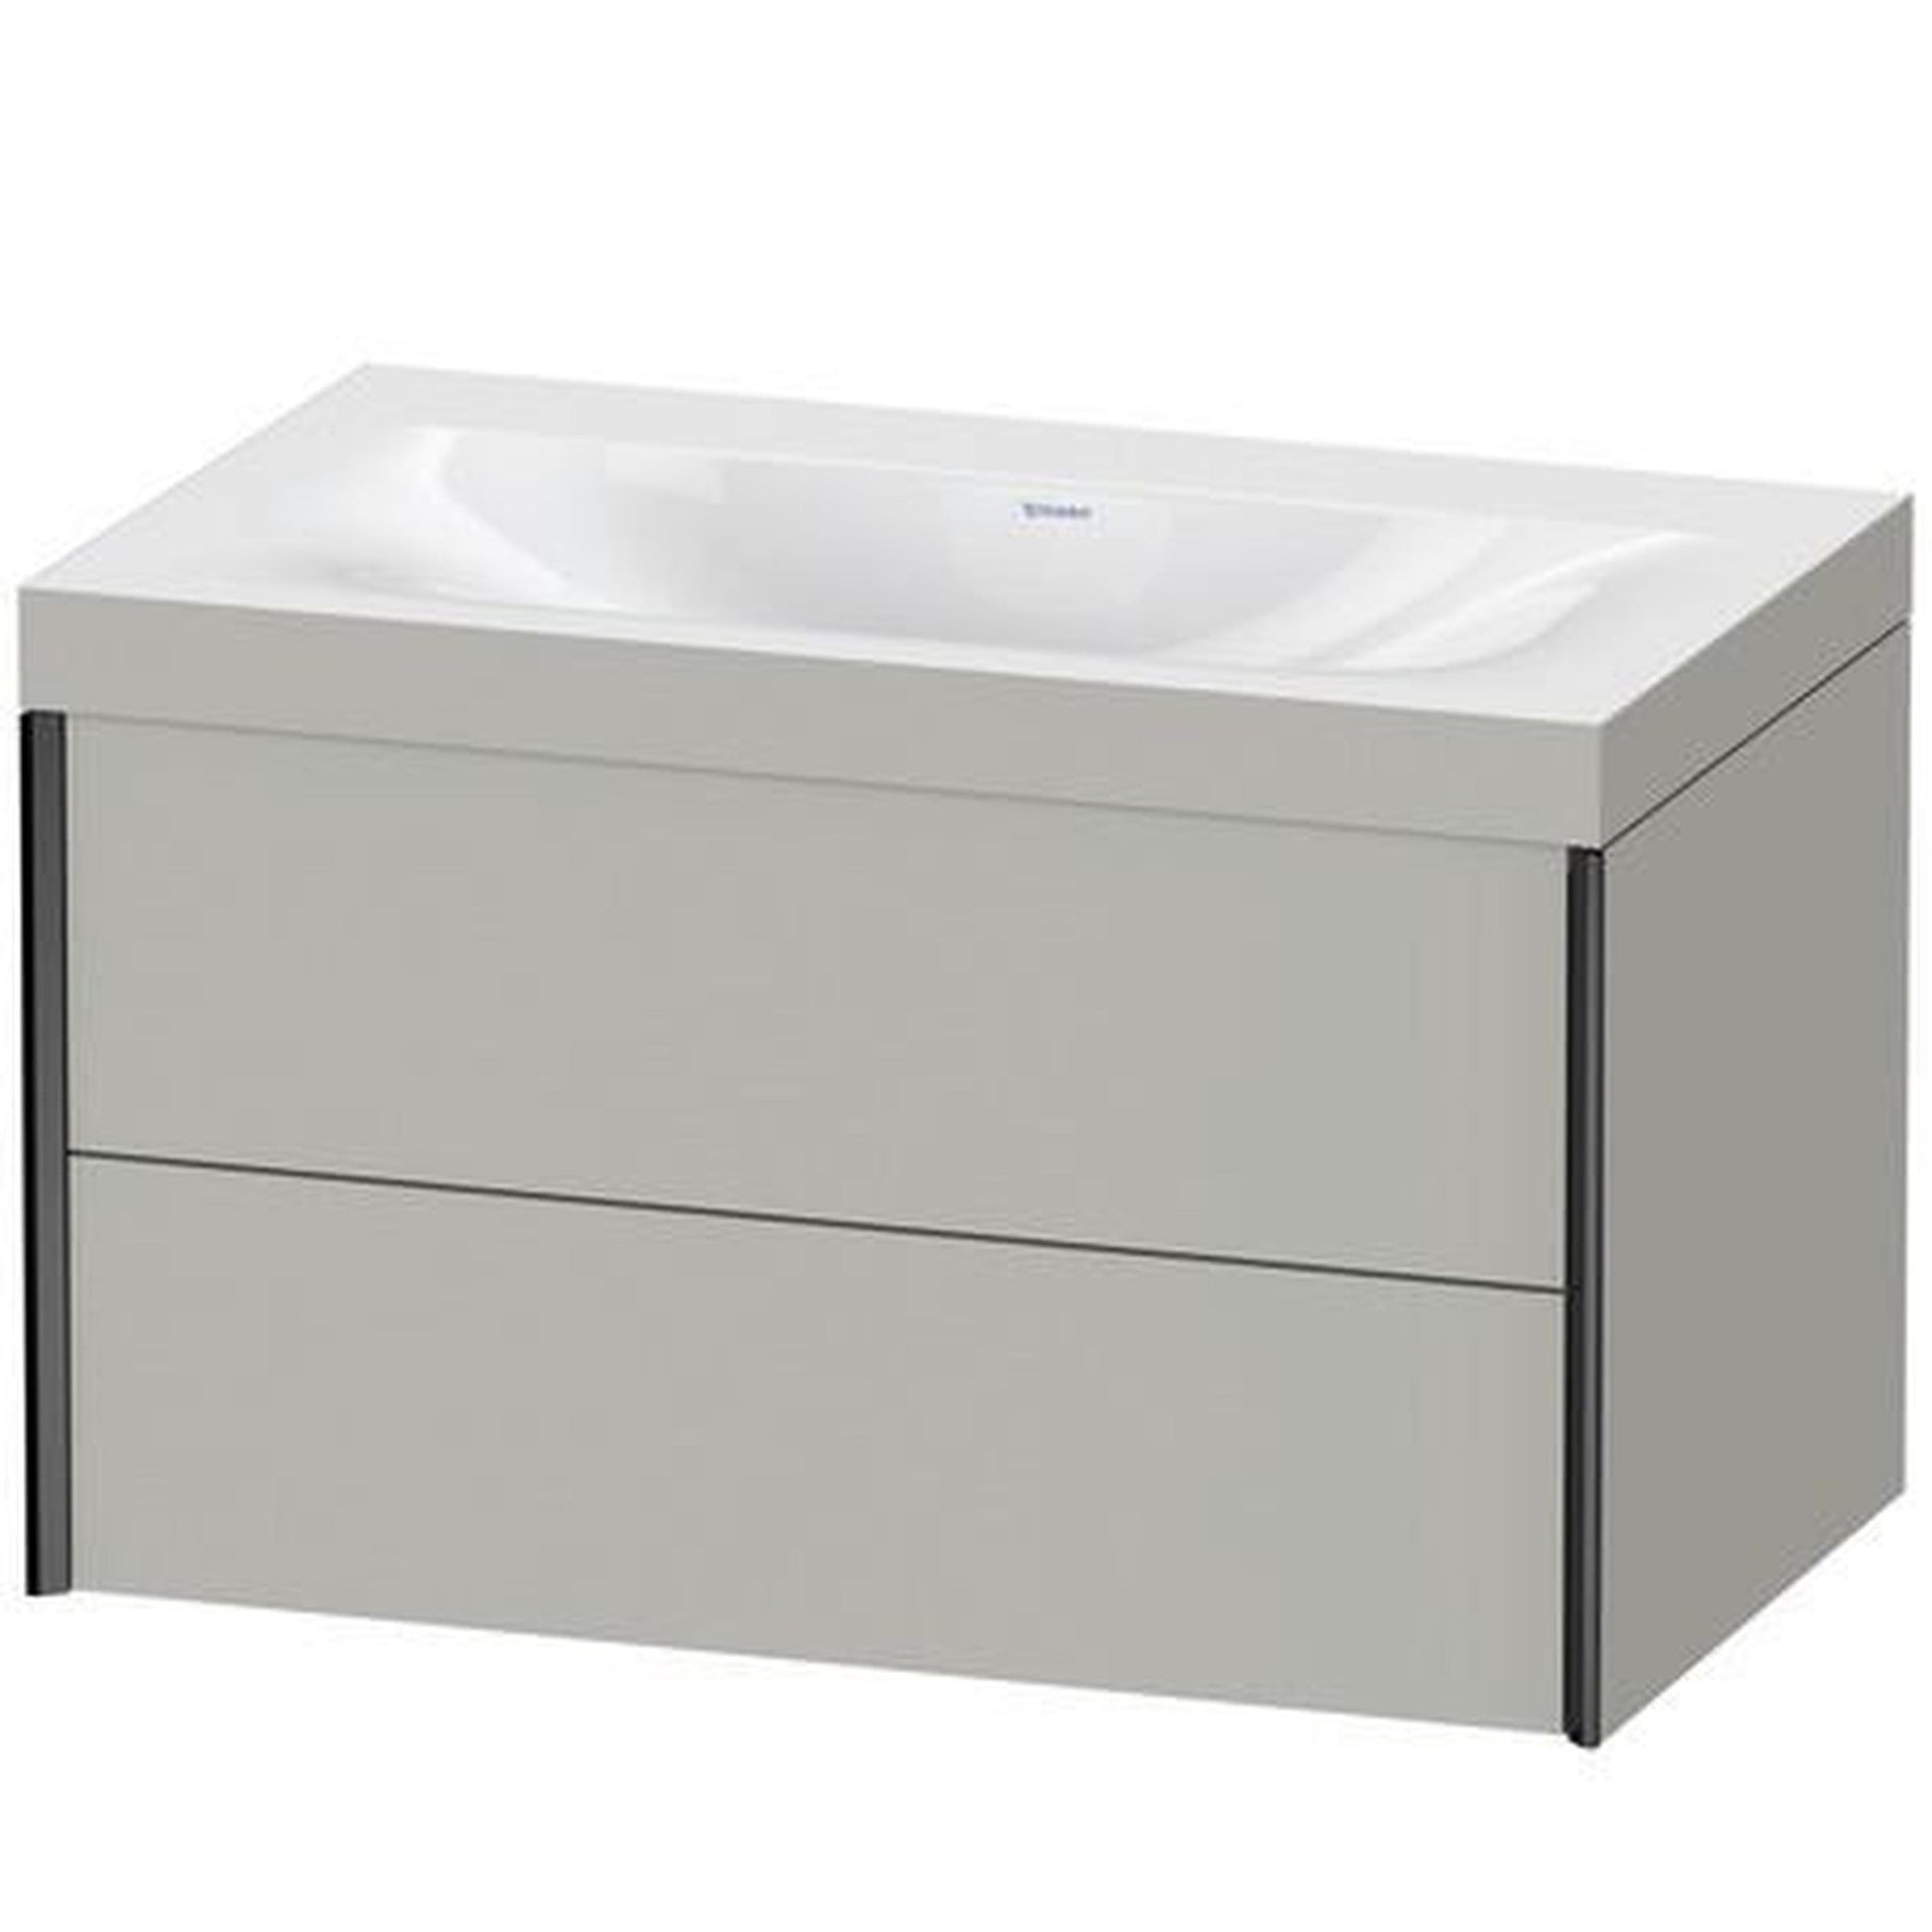 Duravit Xviu 31" x 20" x 19" Two Drawer C-Bonded Wall-Mount Vanity Kit Without Tap Hole, Concrete Gray (XV4615NB207C)